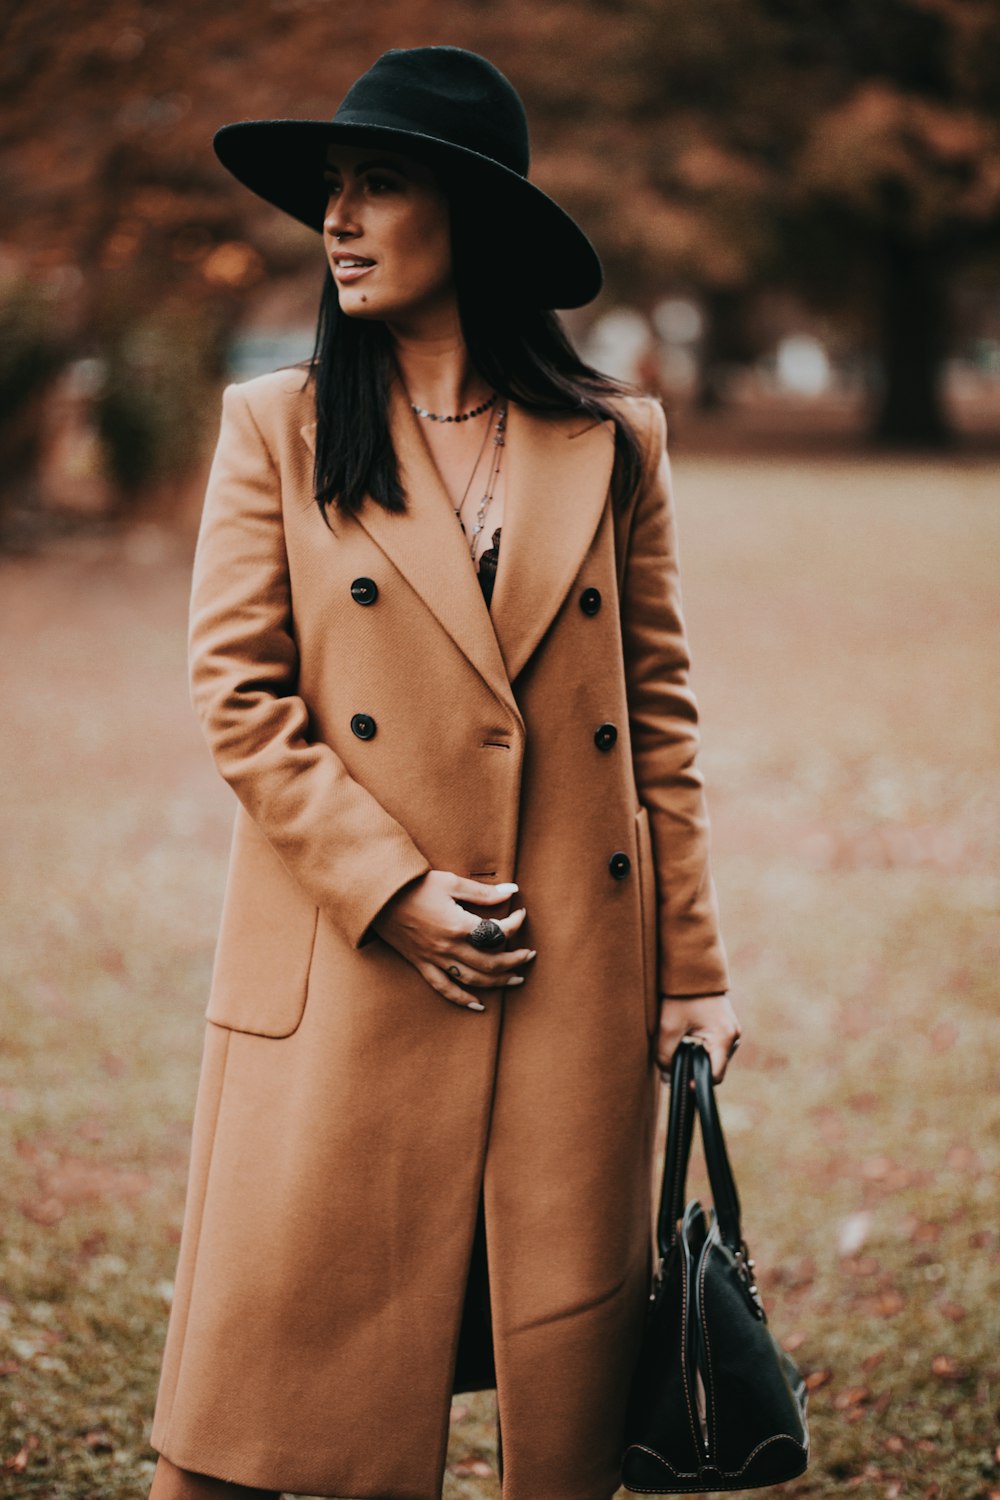 Overcoat Pictures | Download Free Images on Unsplash